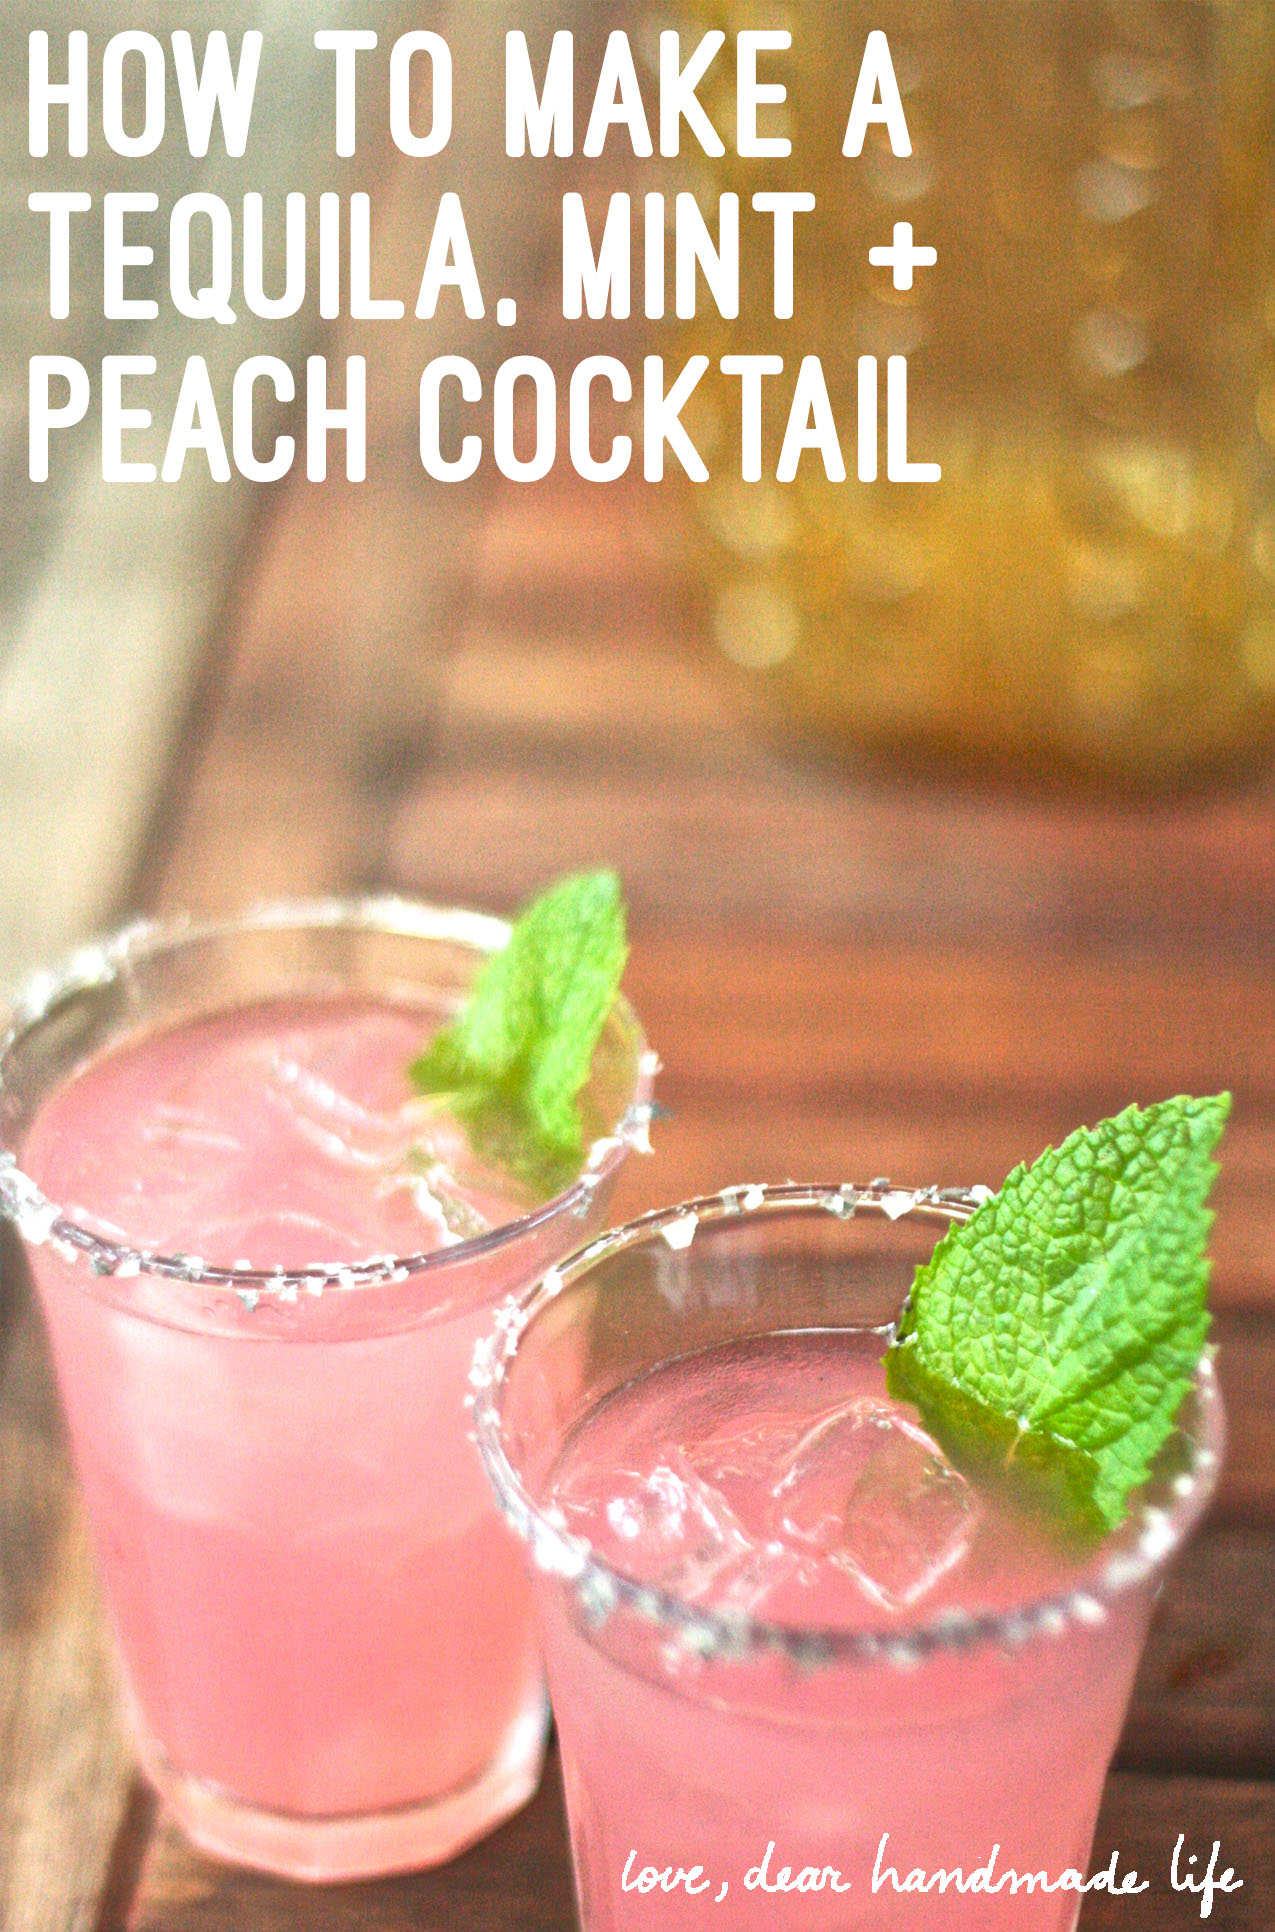 recipe-how-to-make-tequila-mint-peach-cocktail-dear-handmade-life